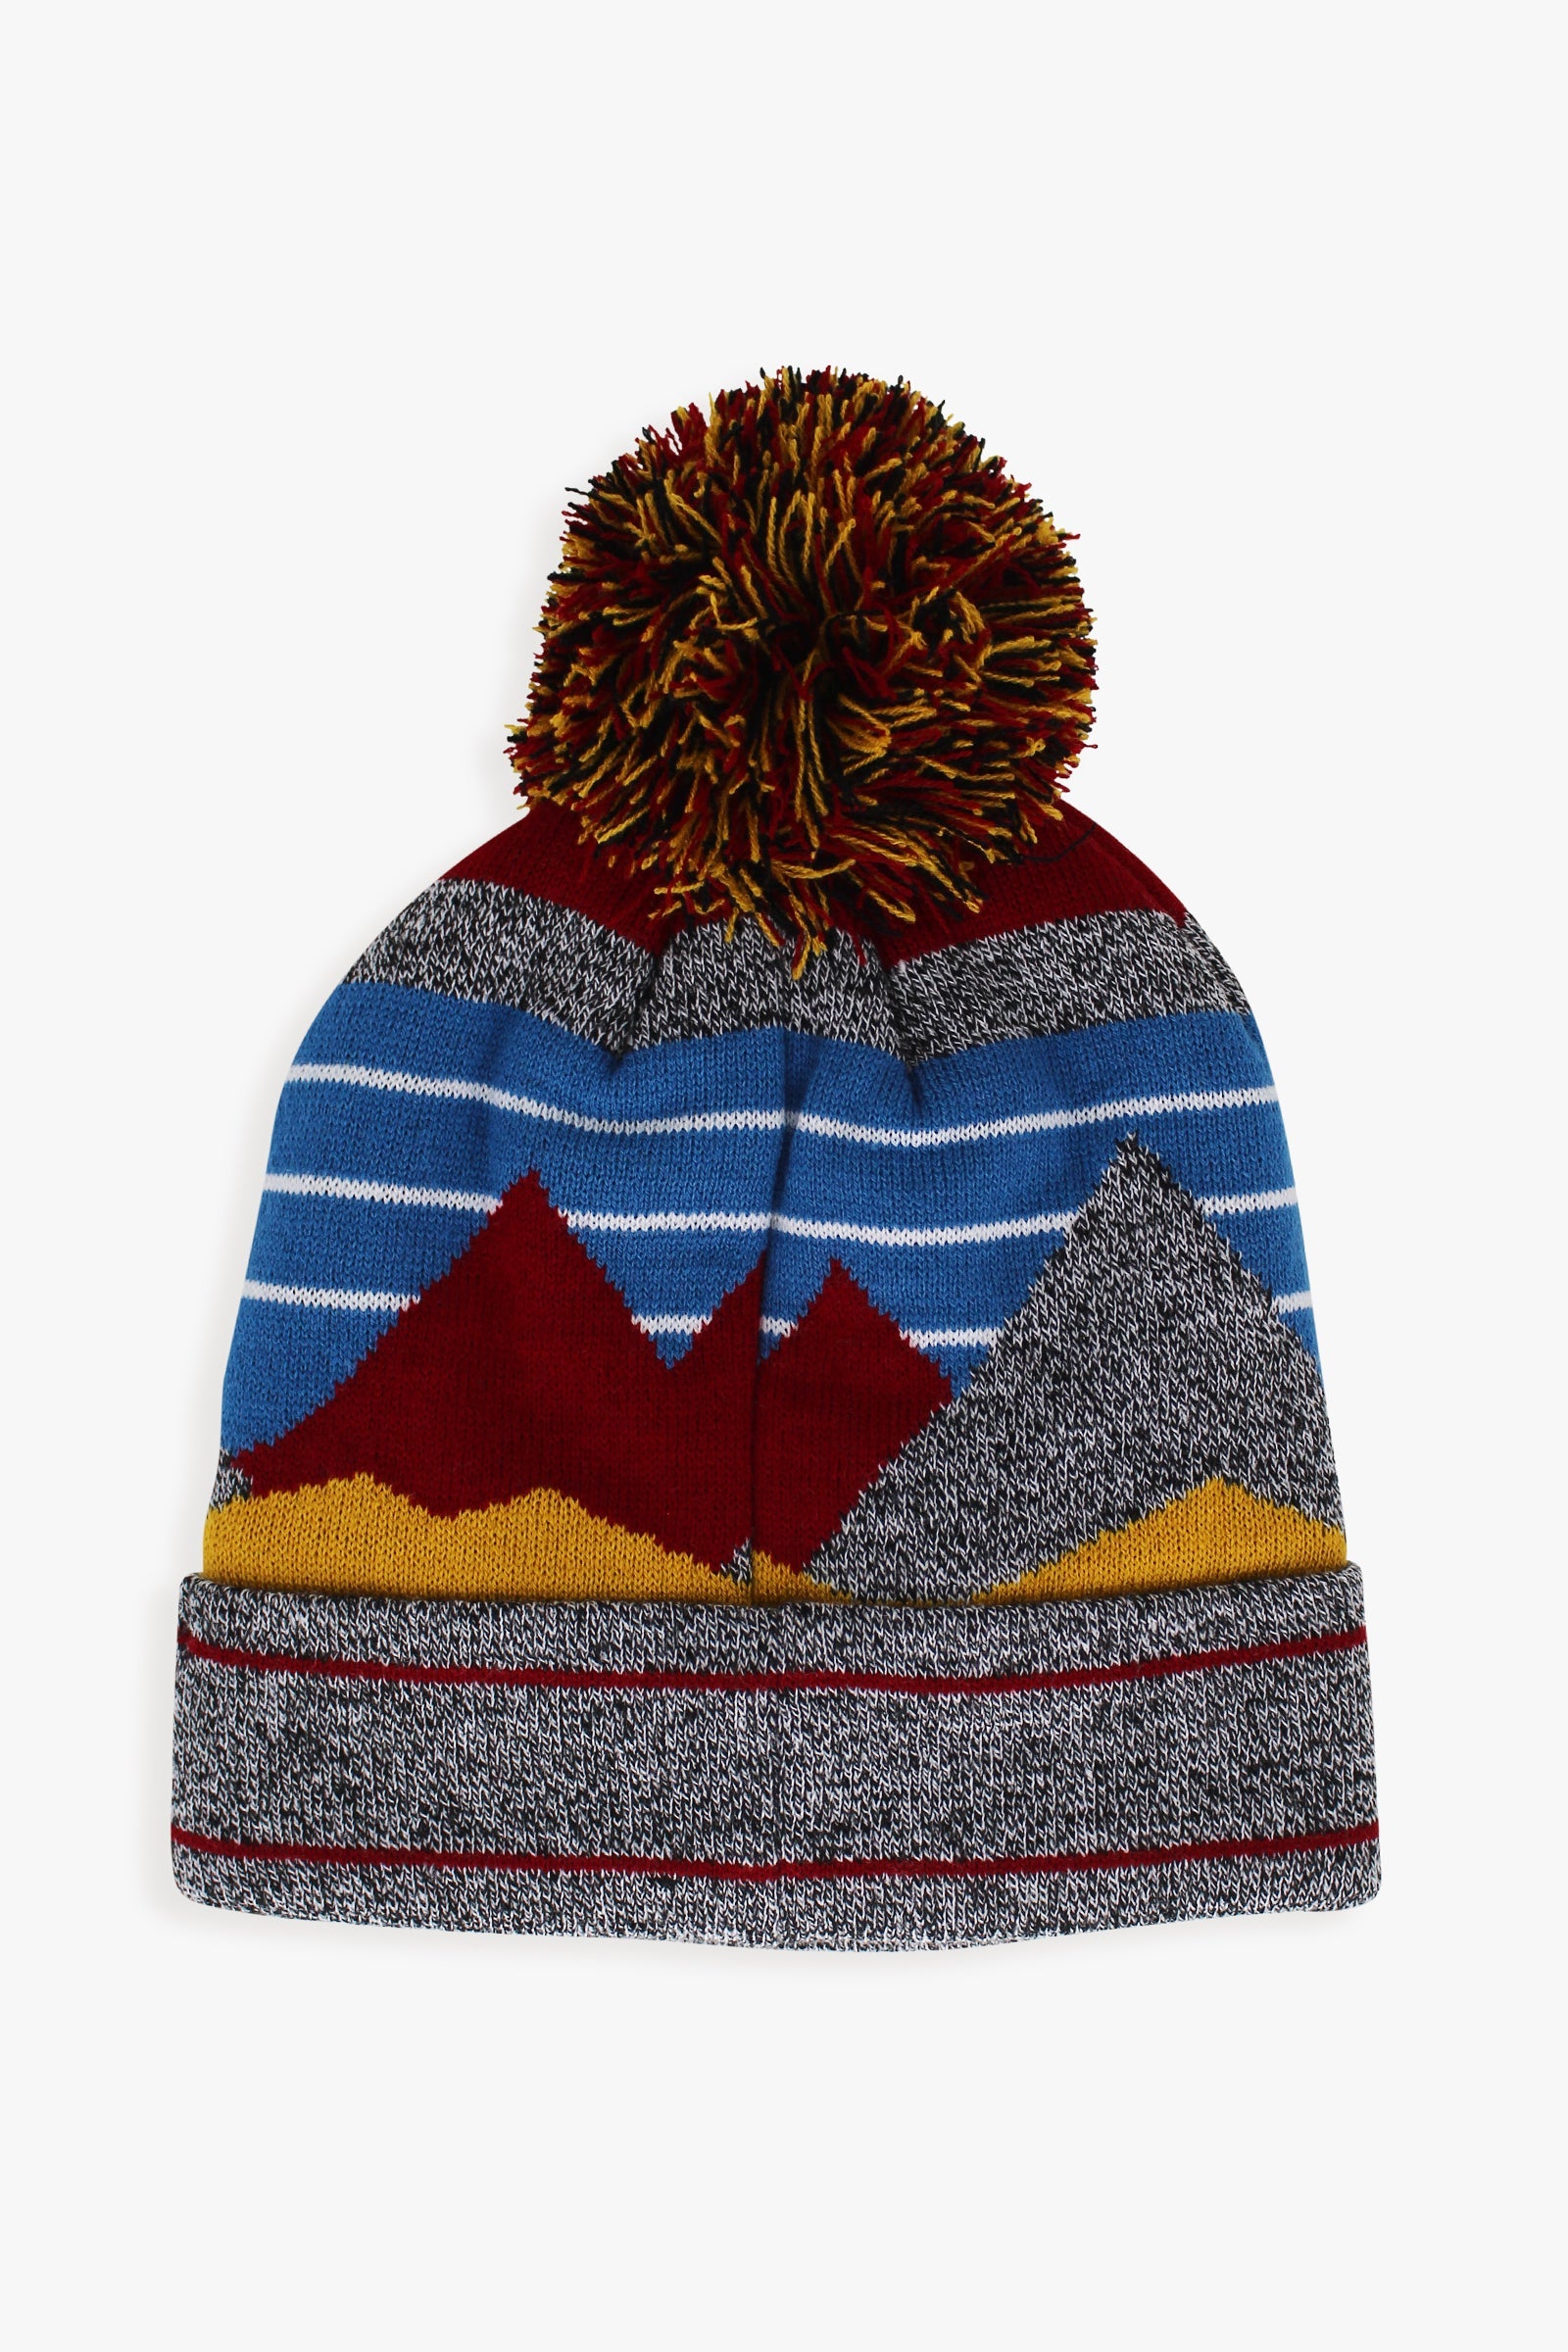 Great Northern Canada Adult Fleece Lined Hat With Scenic Landscape